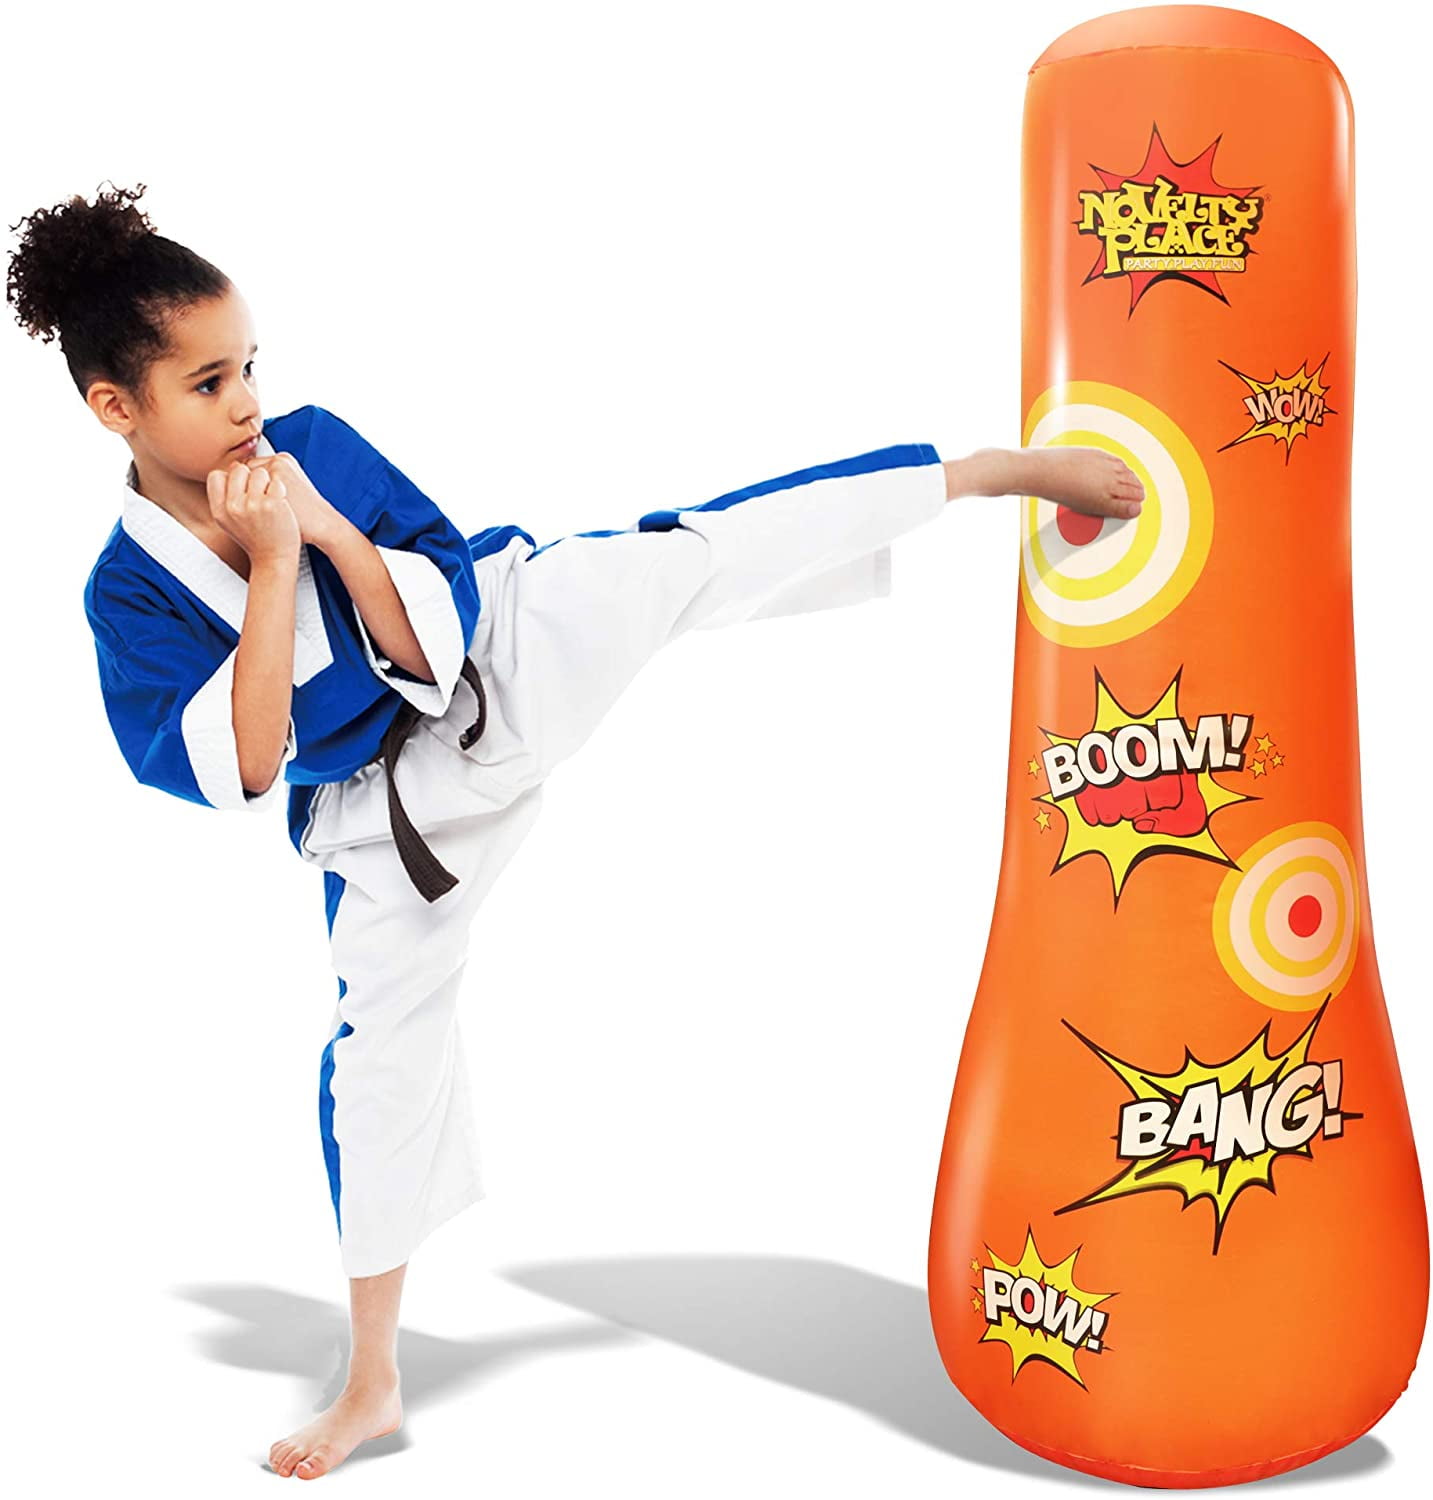 160cm Children Adult Free Standing Inflatable Boxing Punch Bag Kick MMA Training 